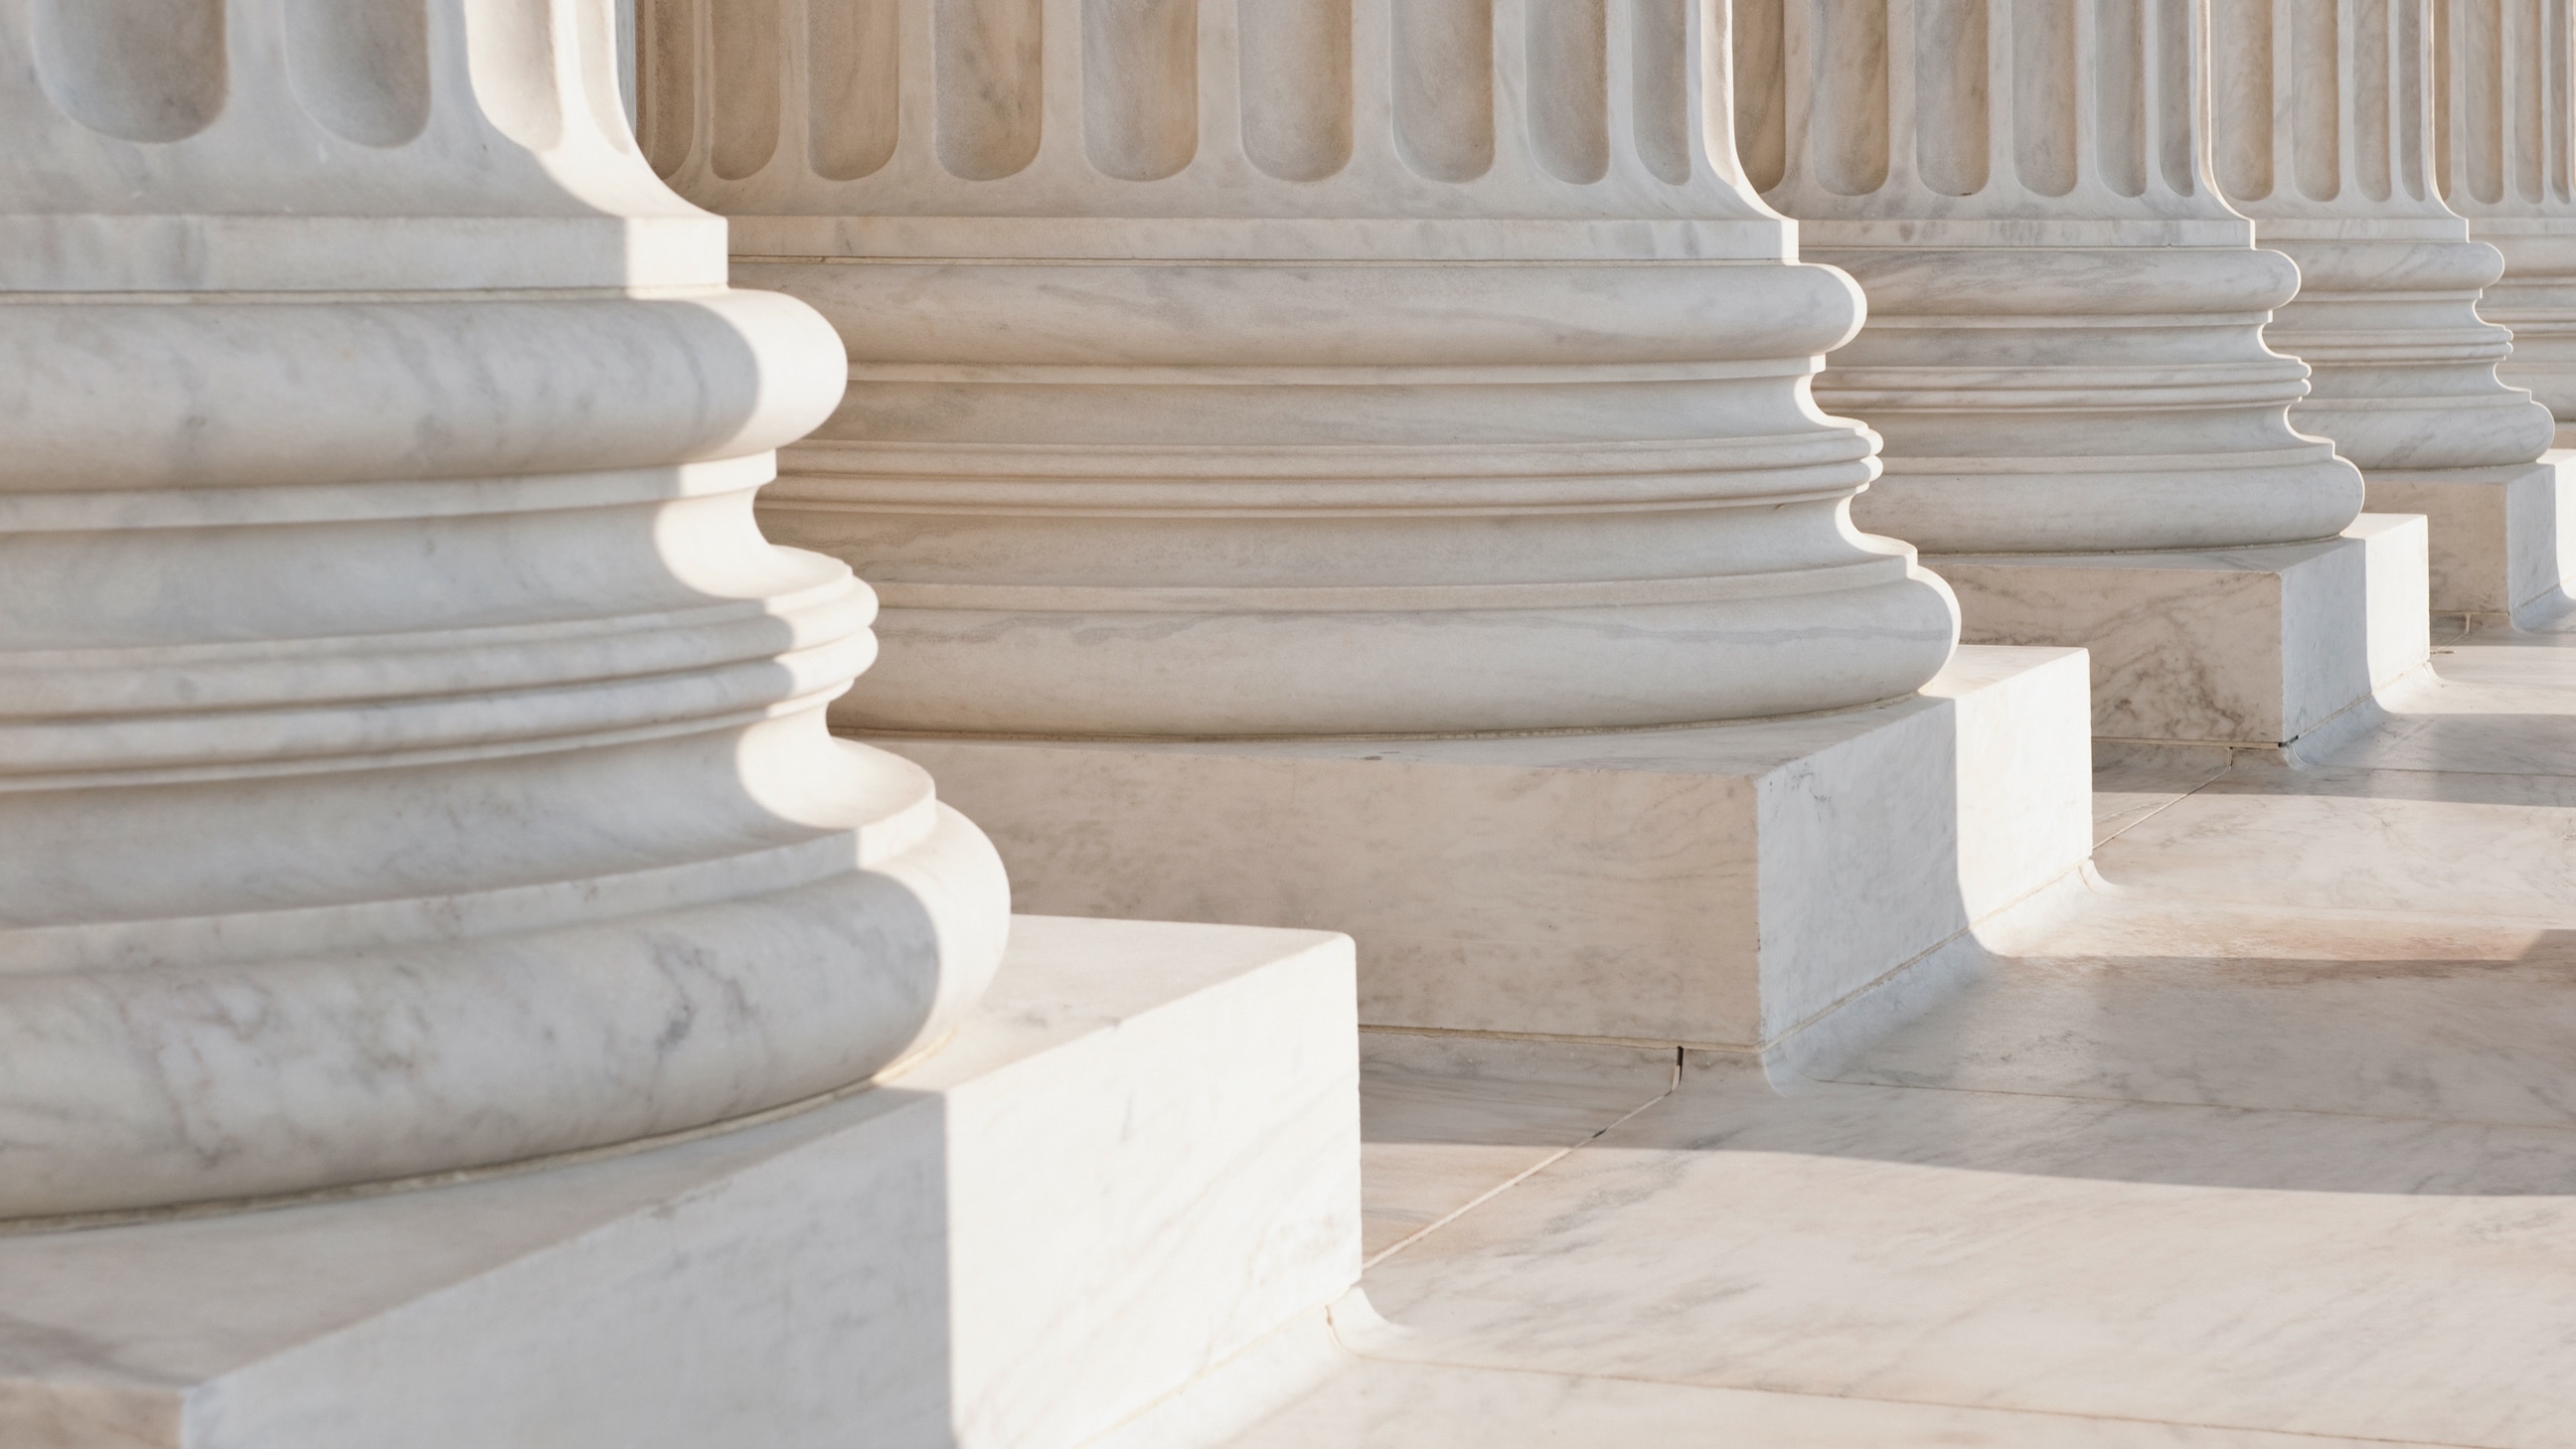 The architectural detail of several solid, elegant marble columns.